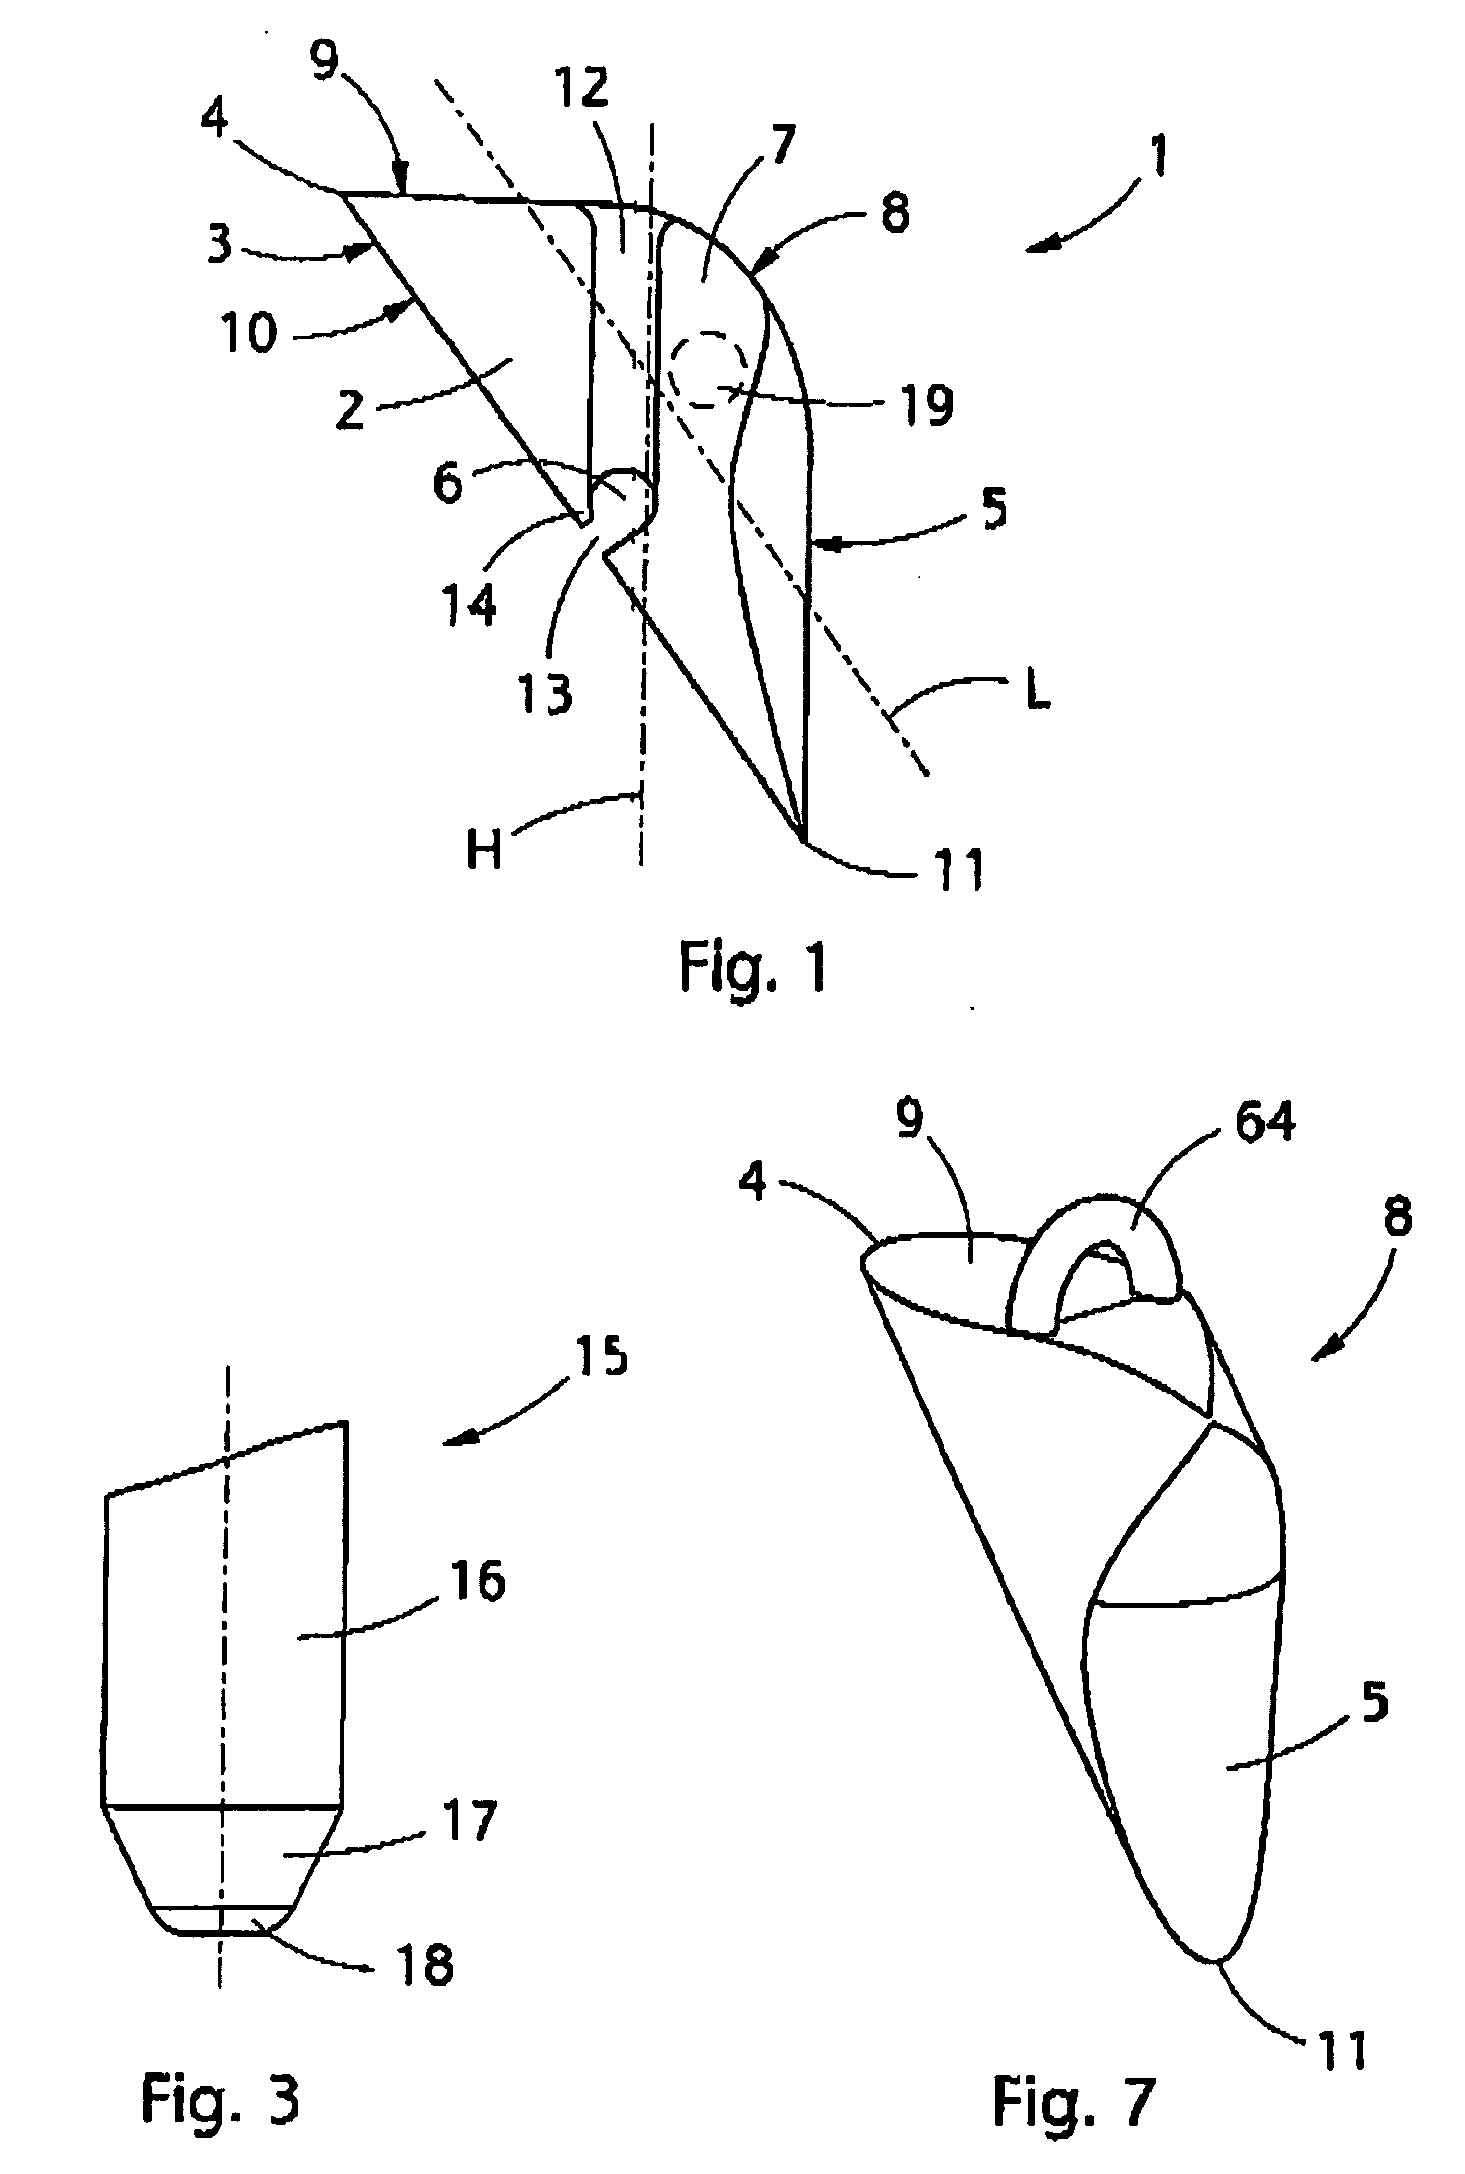 Apparatus for attaching sutures